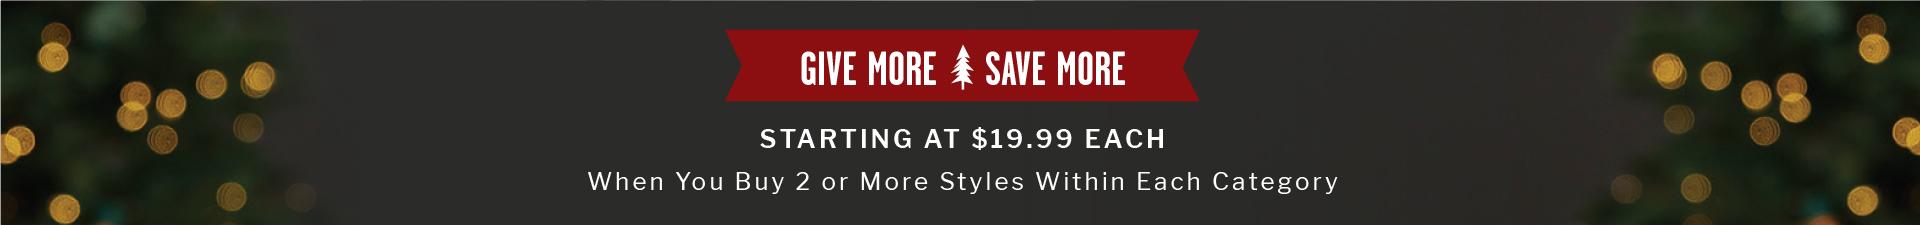 GIVE MORE, SAVE MORE | STARTING AT $19.99 EACH | When You Buy 2 or More Styles Within Each Category